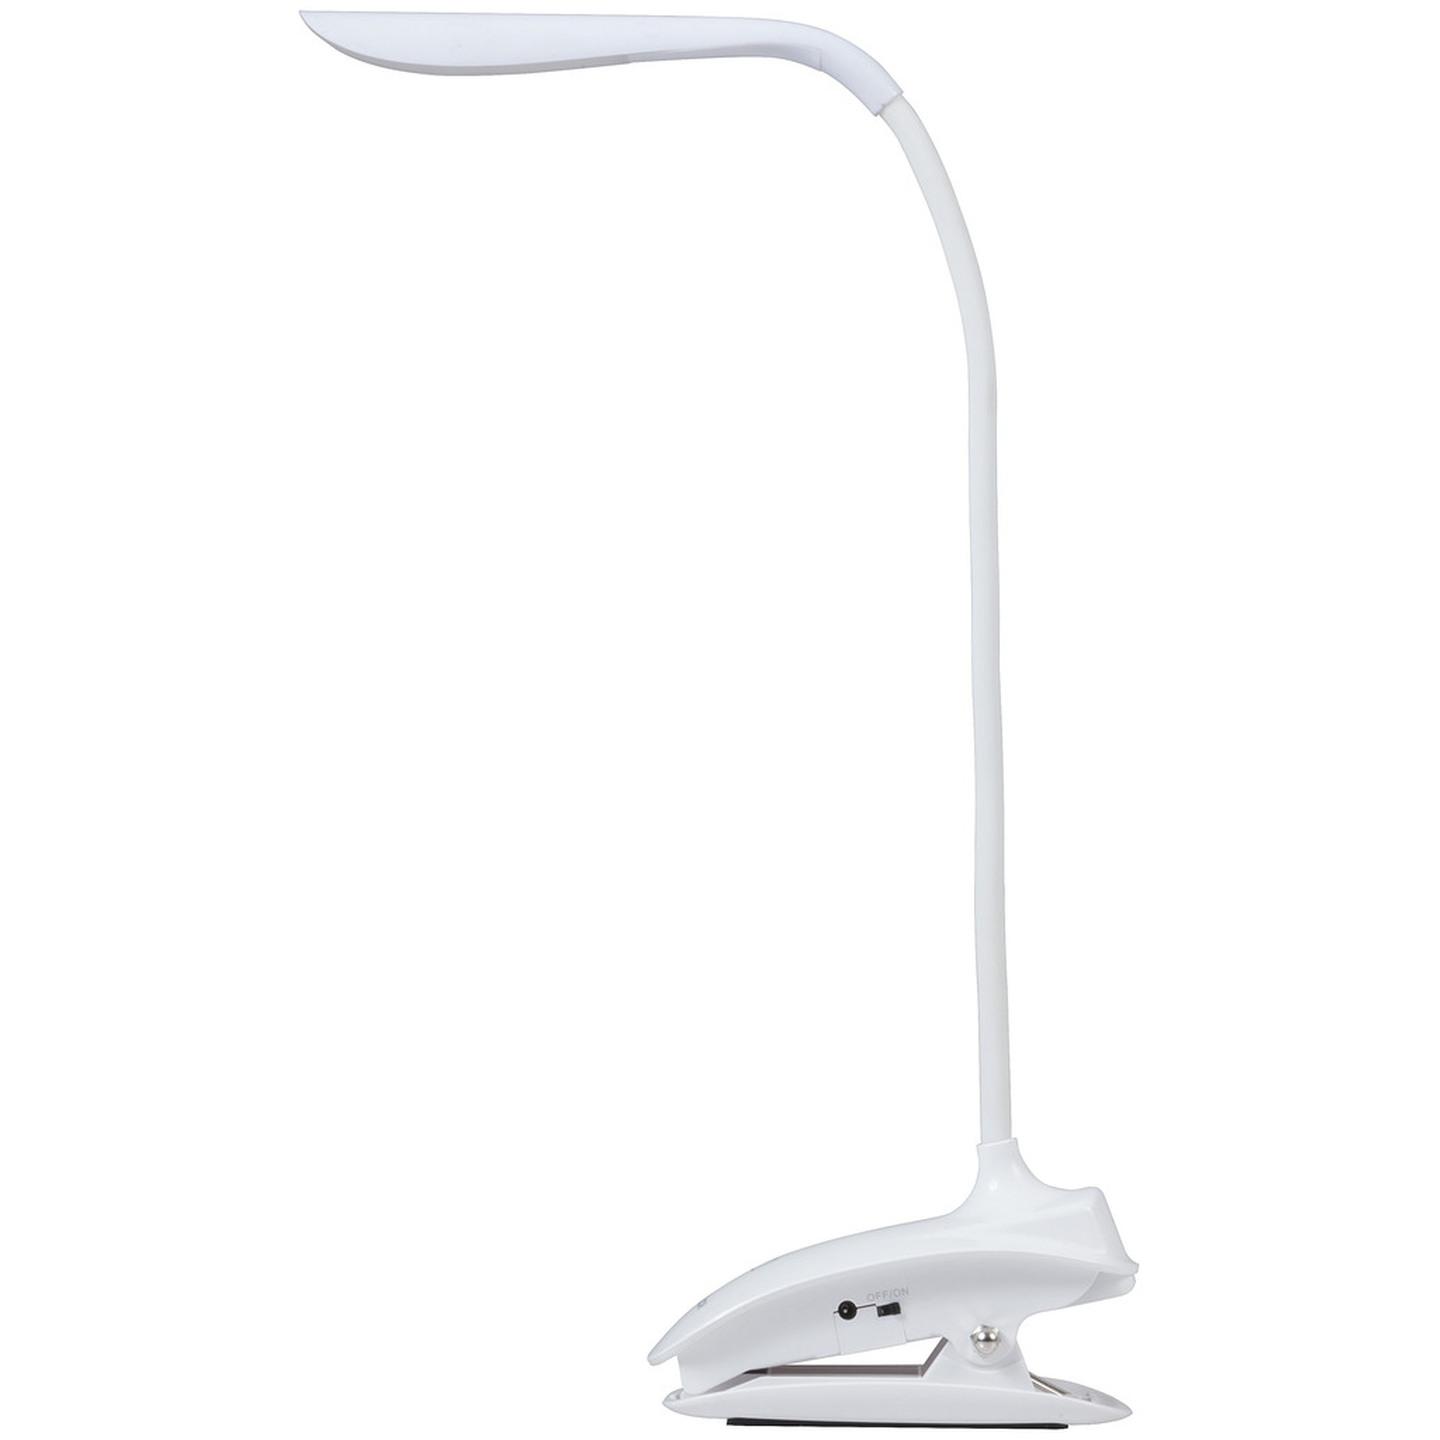 COB LED Desk Lamp With Clamp